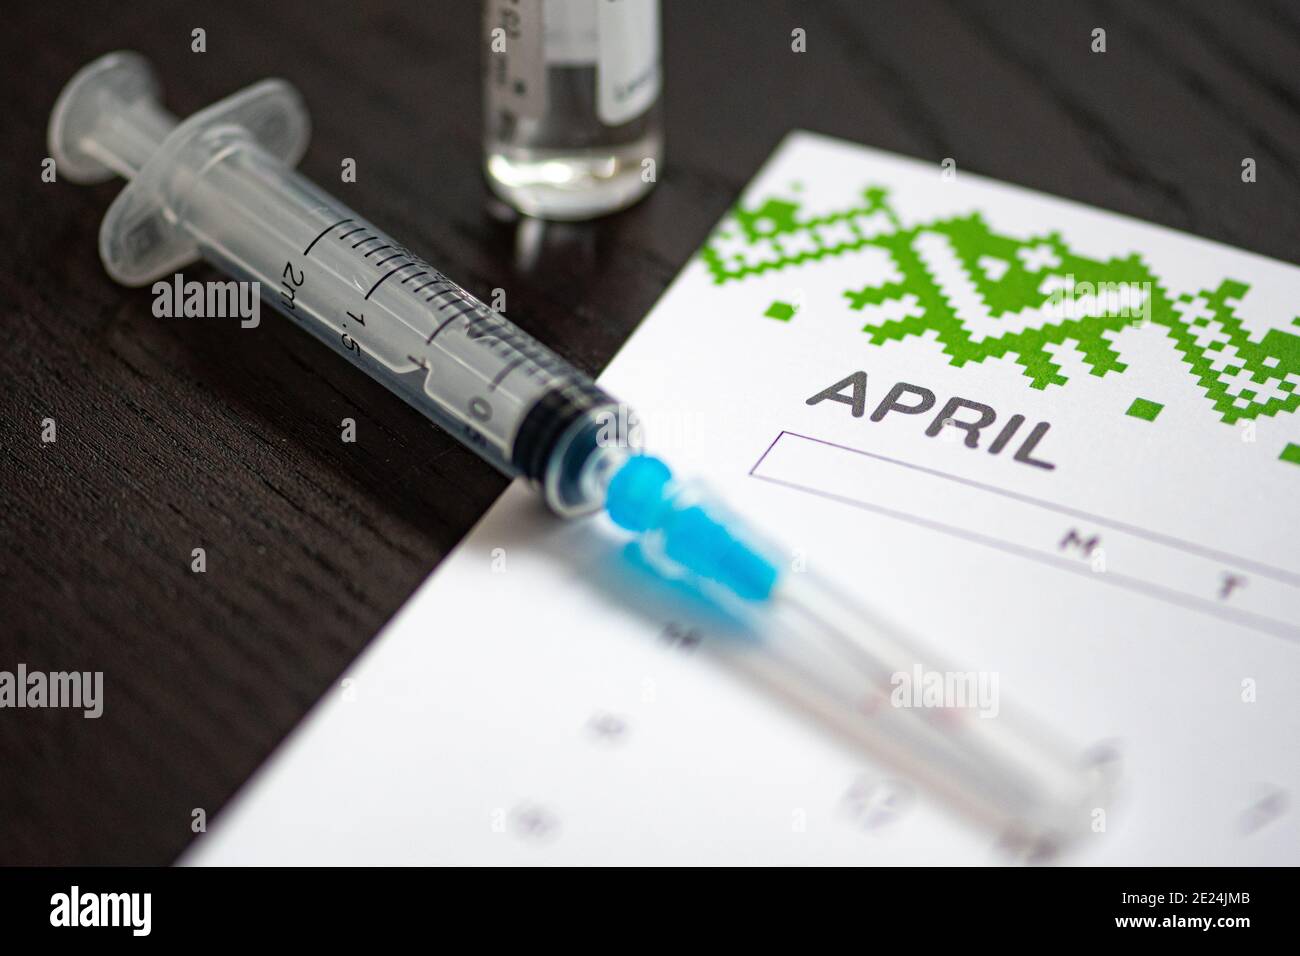 Syringe, vial and calendar with month of April on a black table ready to be used. Covid or Coronavirus vaccine background Stock Photo